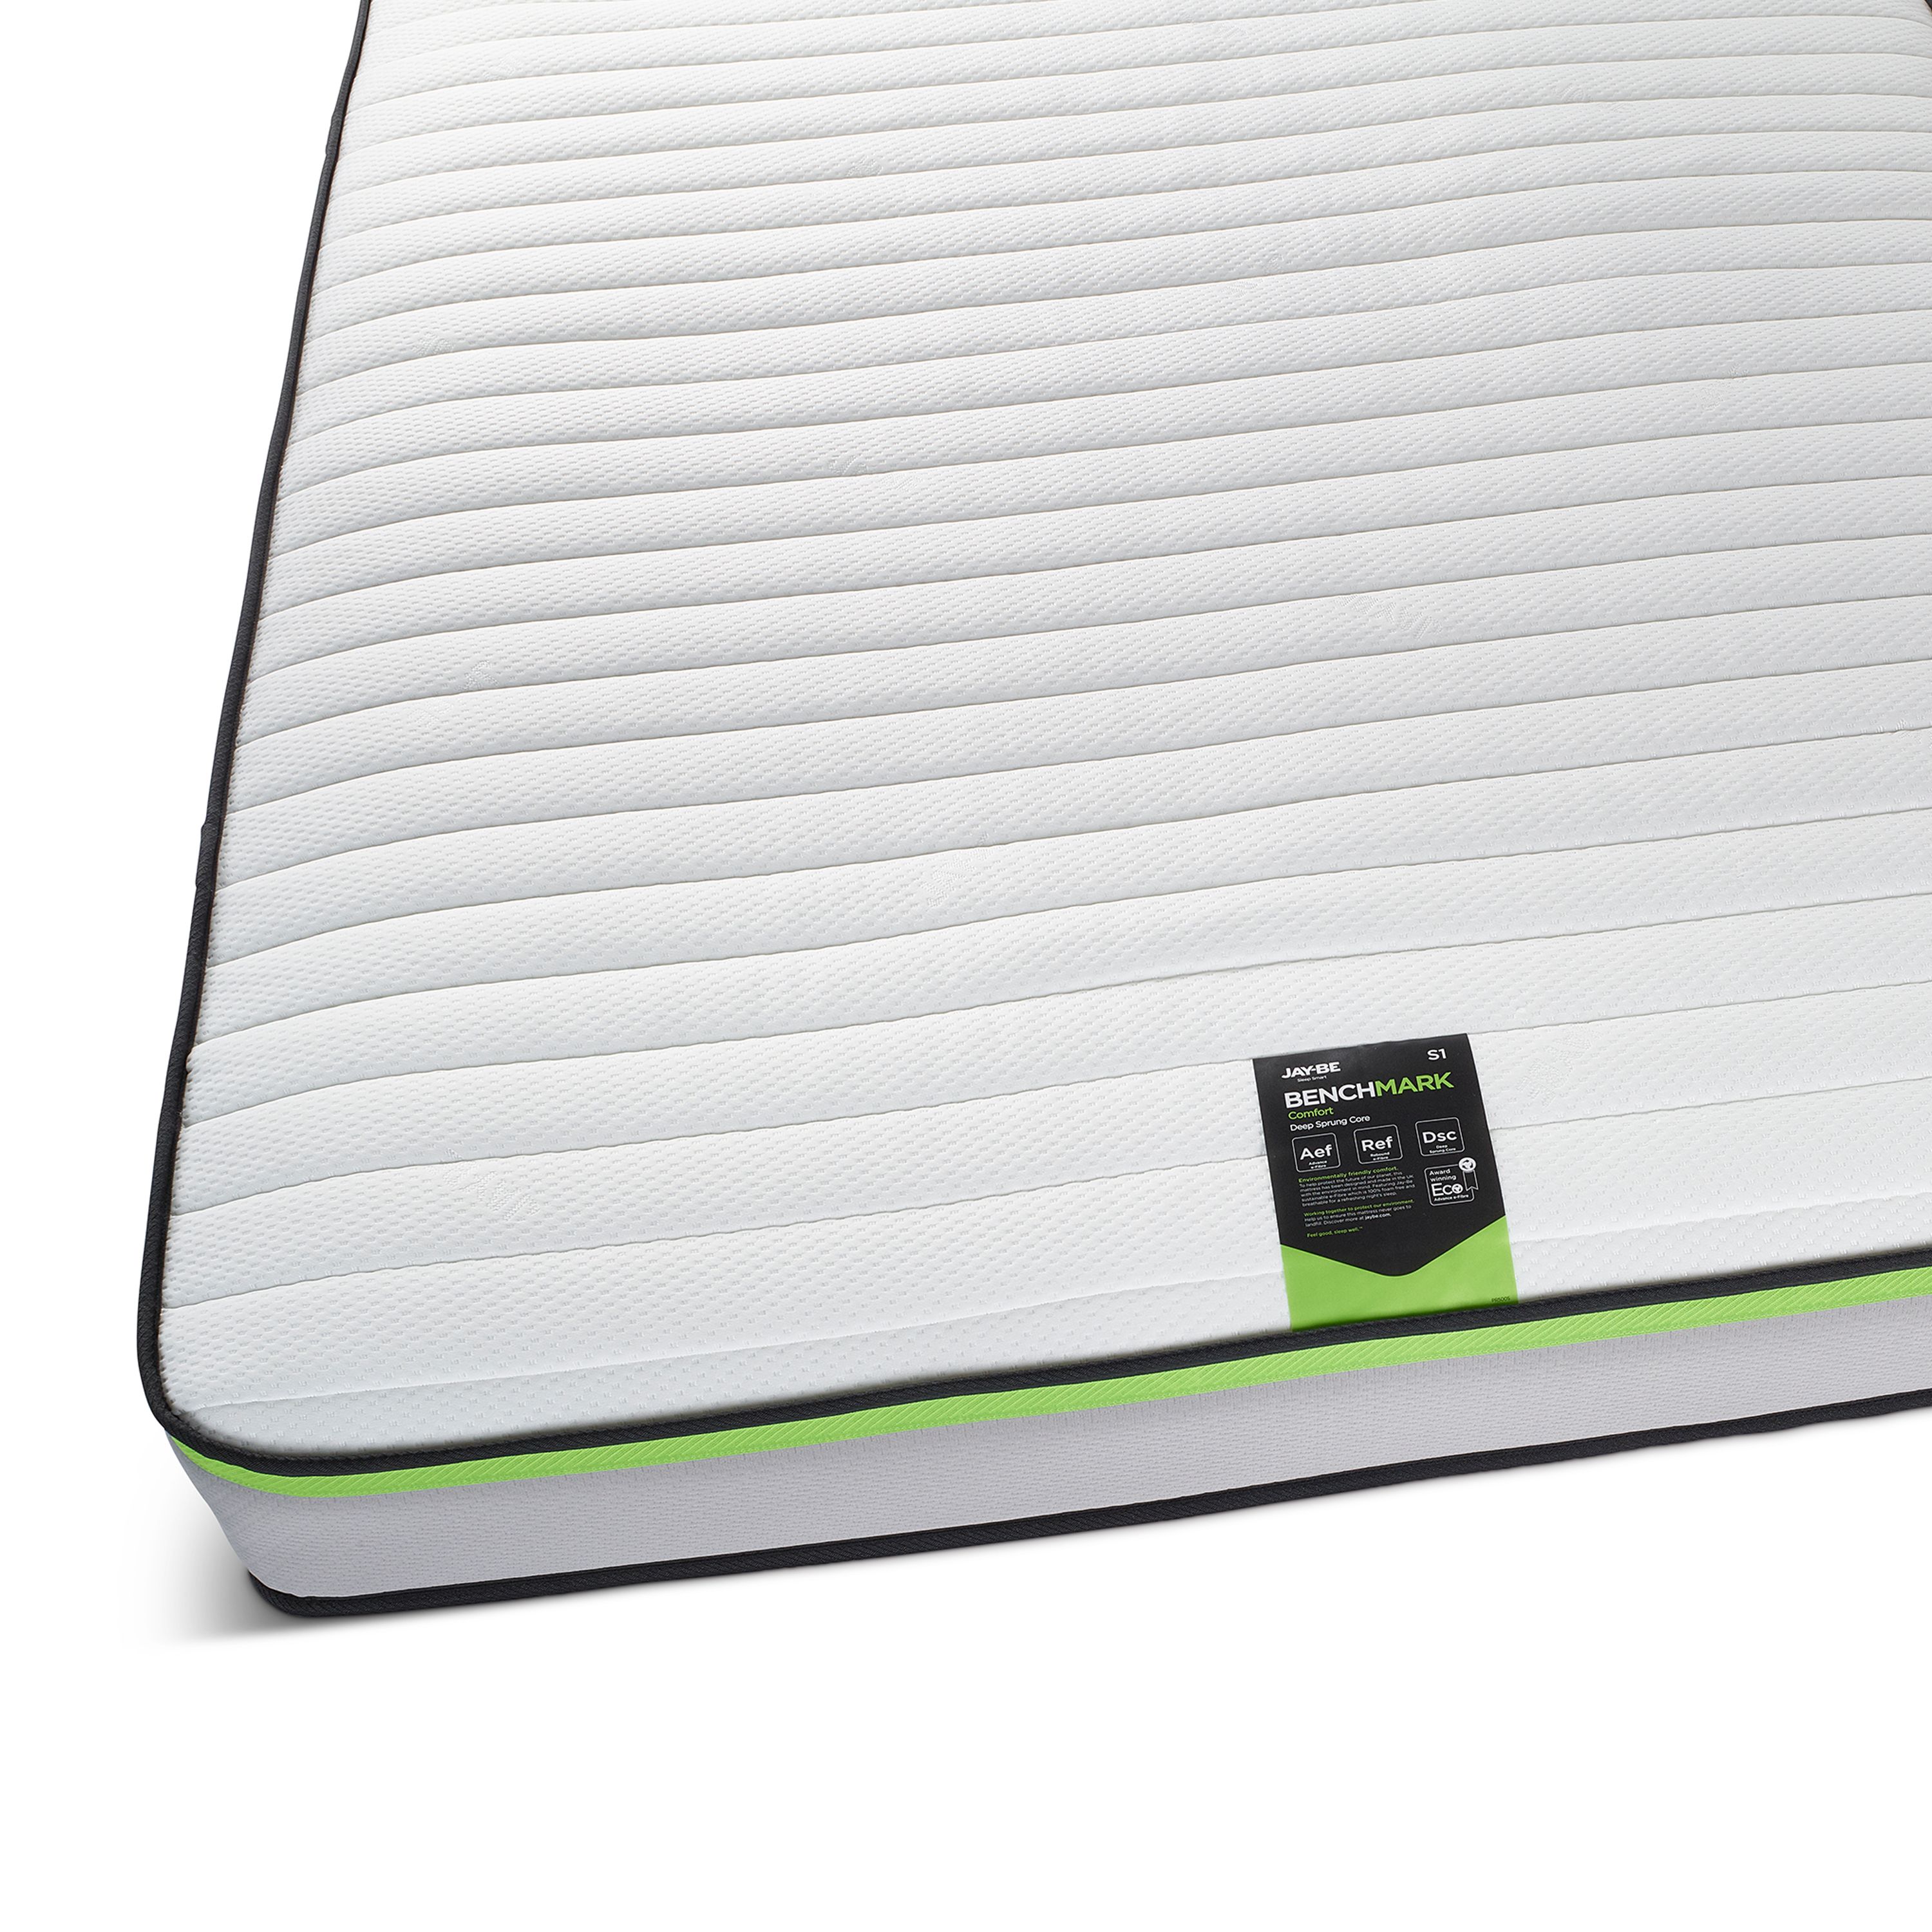 Jay-Be Benchmark S1 Comfort Eco Friendly Open coil Water resistant Small double Mattress